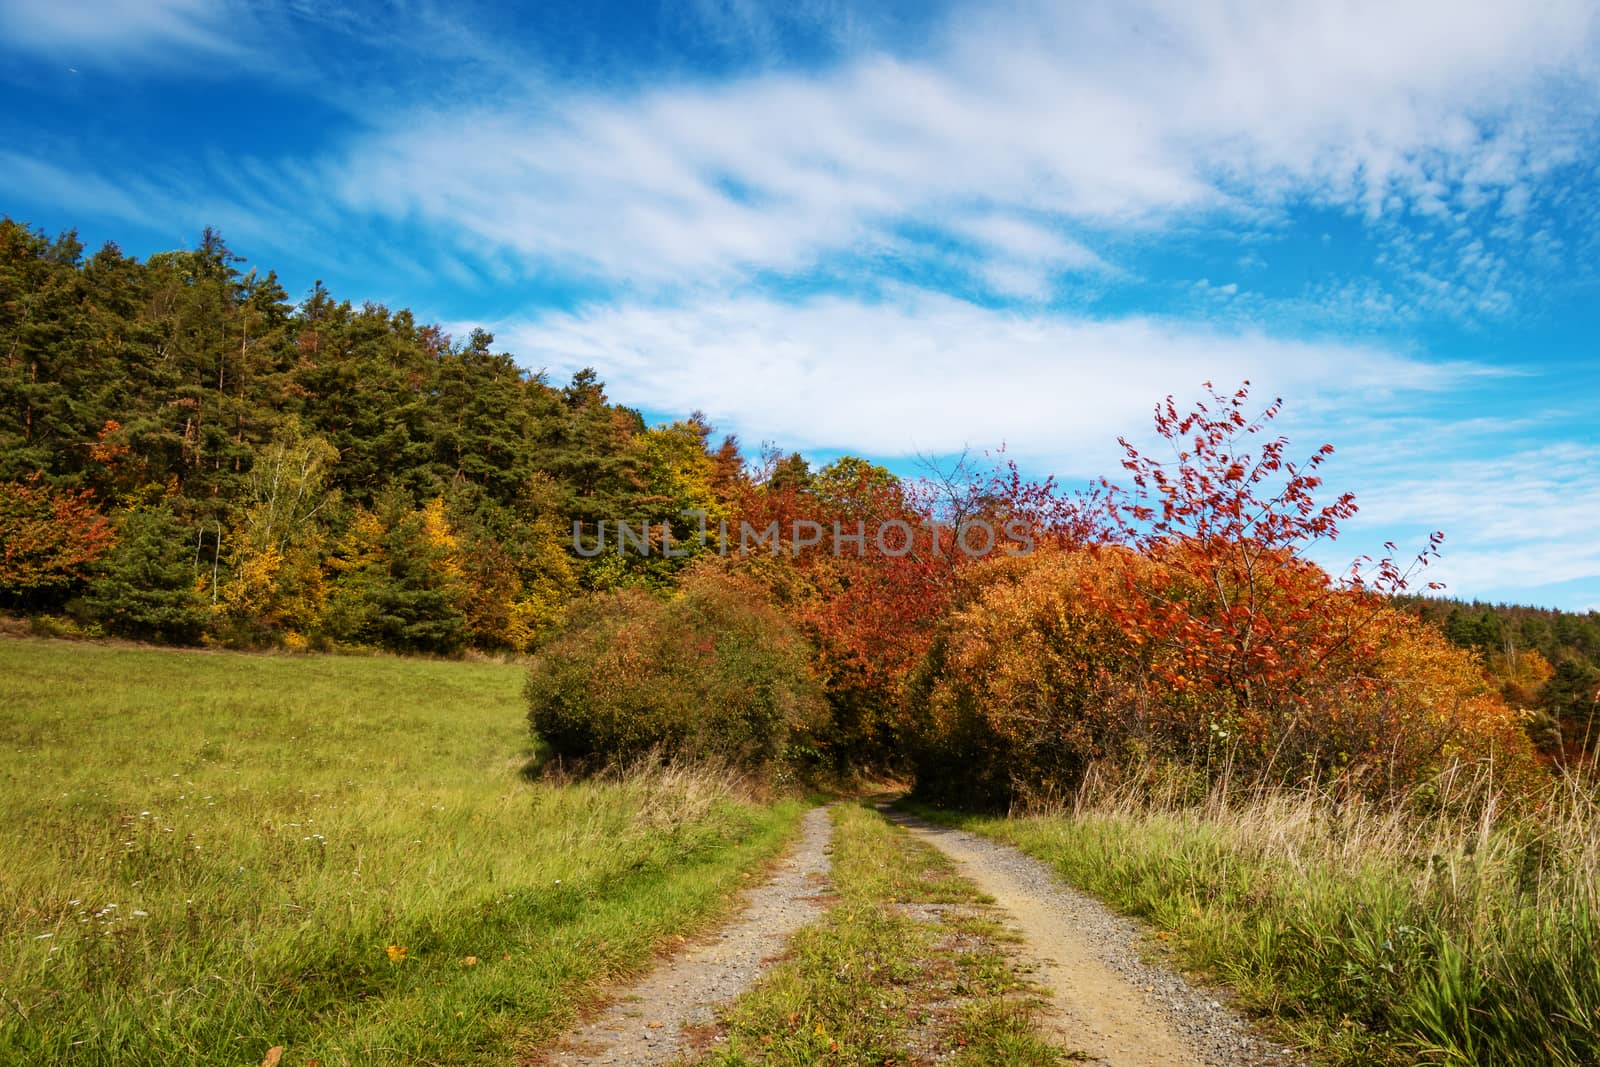 Autumn landscape. A dirt road leading between autumn colored bushes with a blue sky with white clouds in the background.